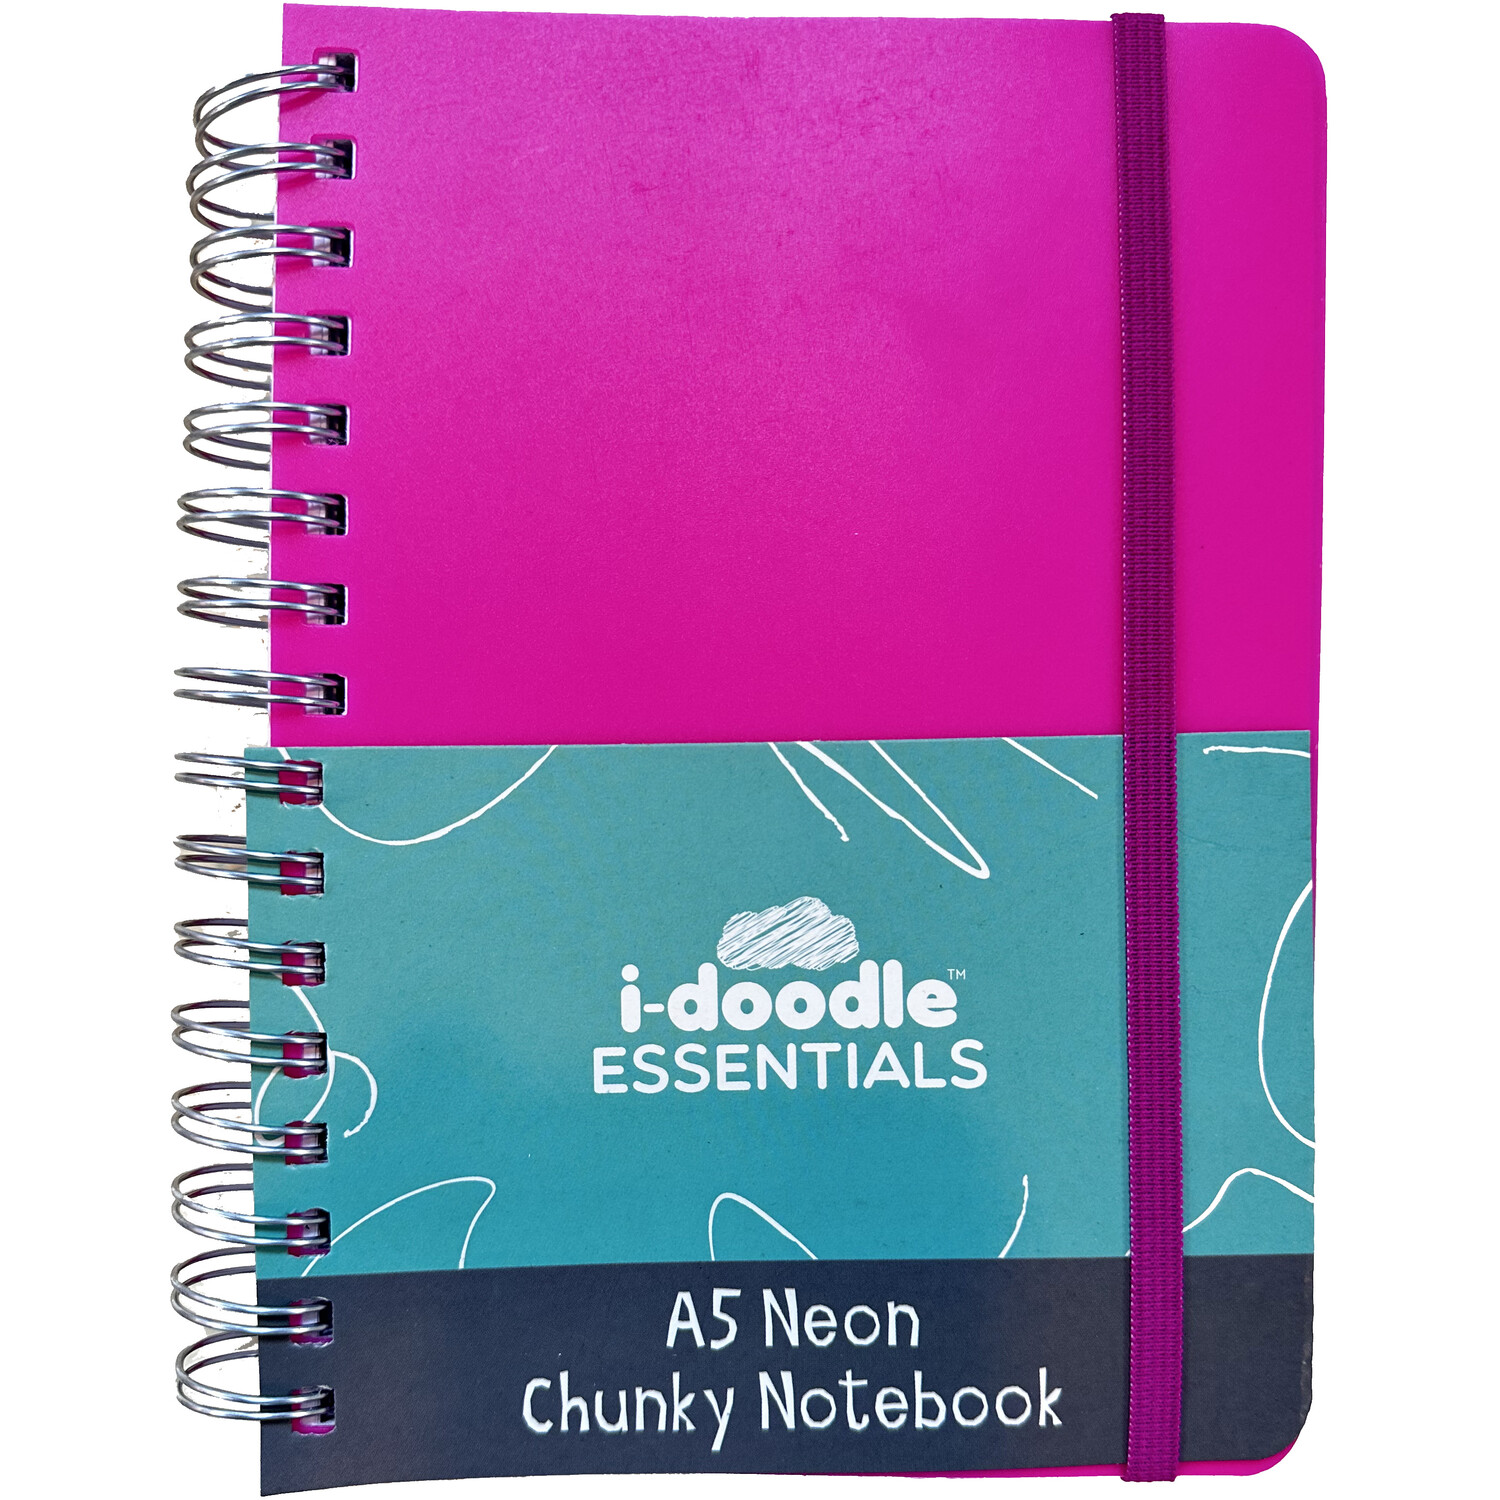 A5 Neon Chunky Notebook Image